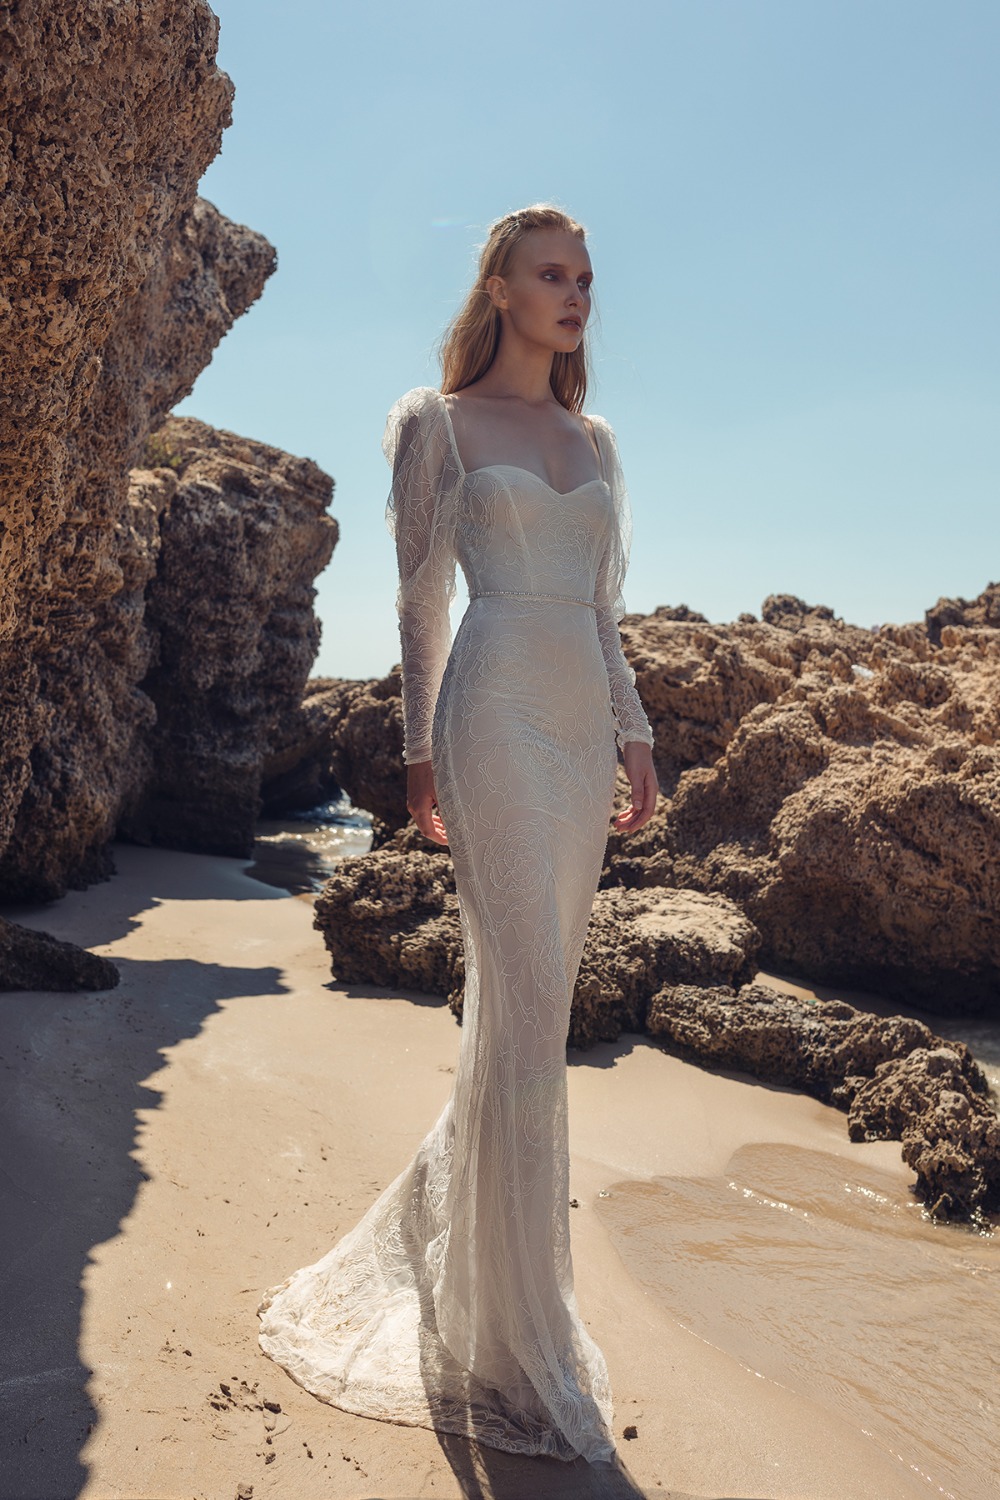 slinky gown with dramatic puffed sleeves by Lilium